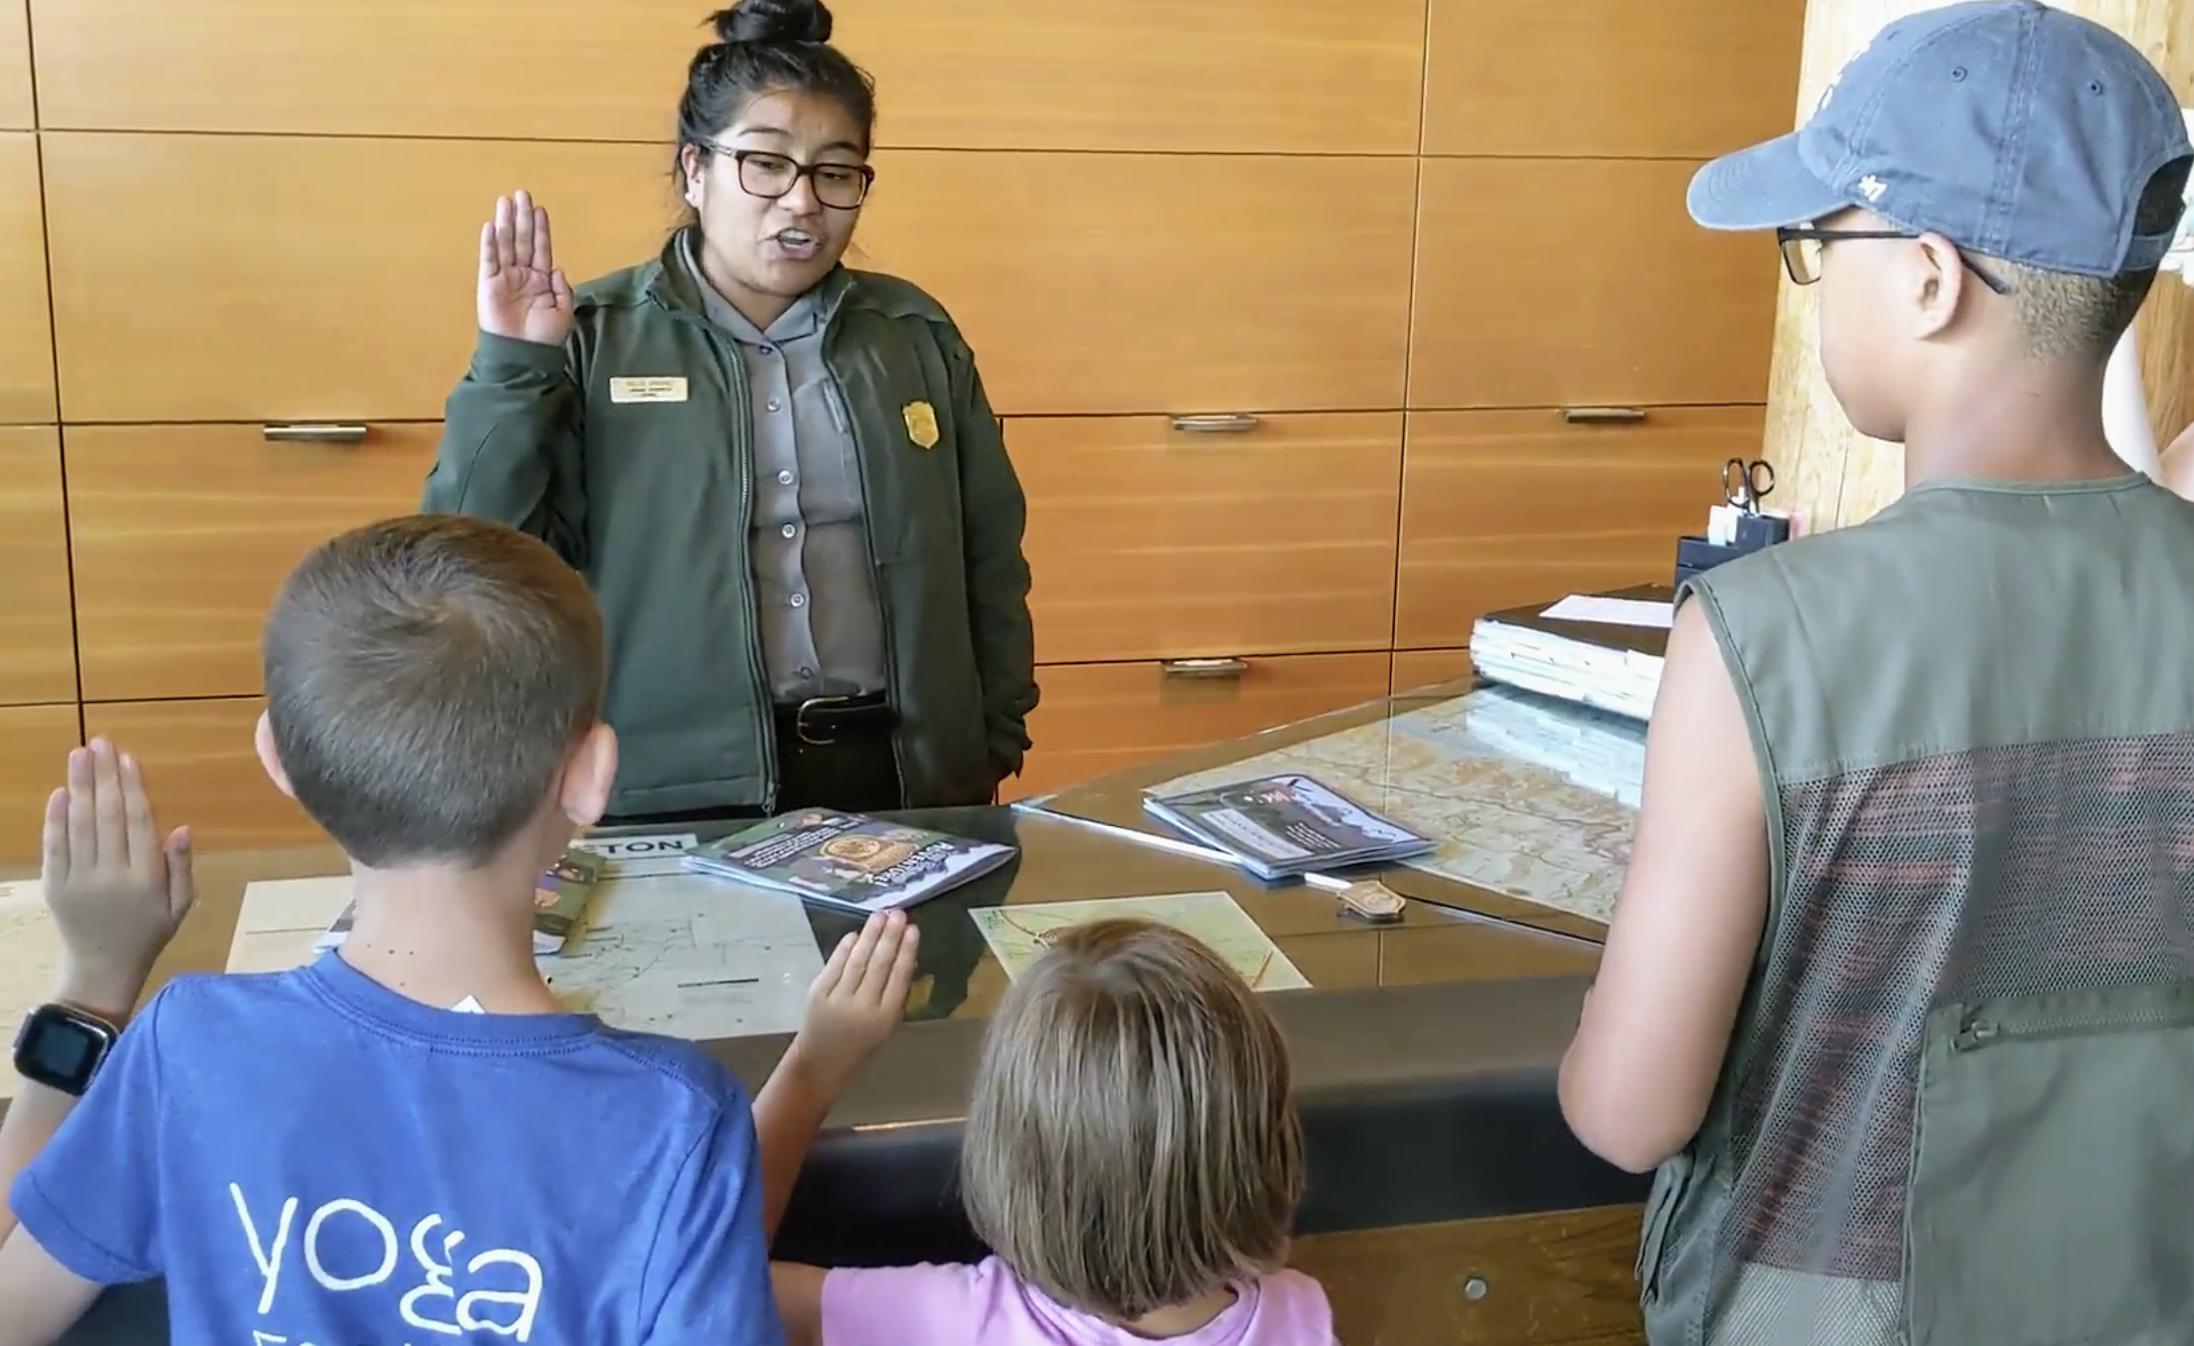 Junior Rangers Program, like the Passports, are available at most National Parks.